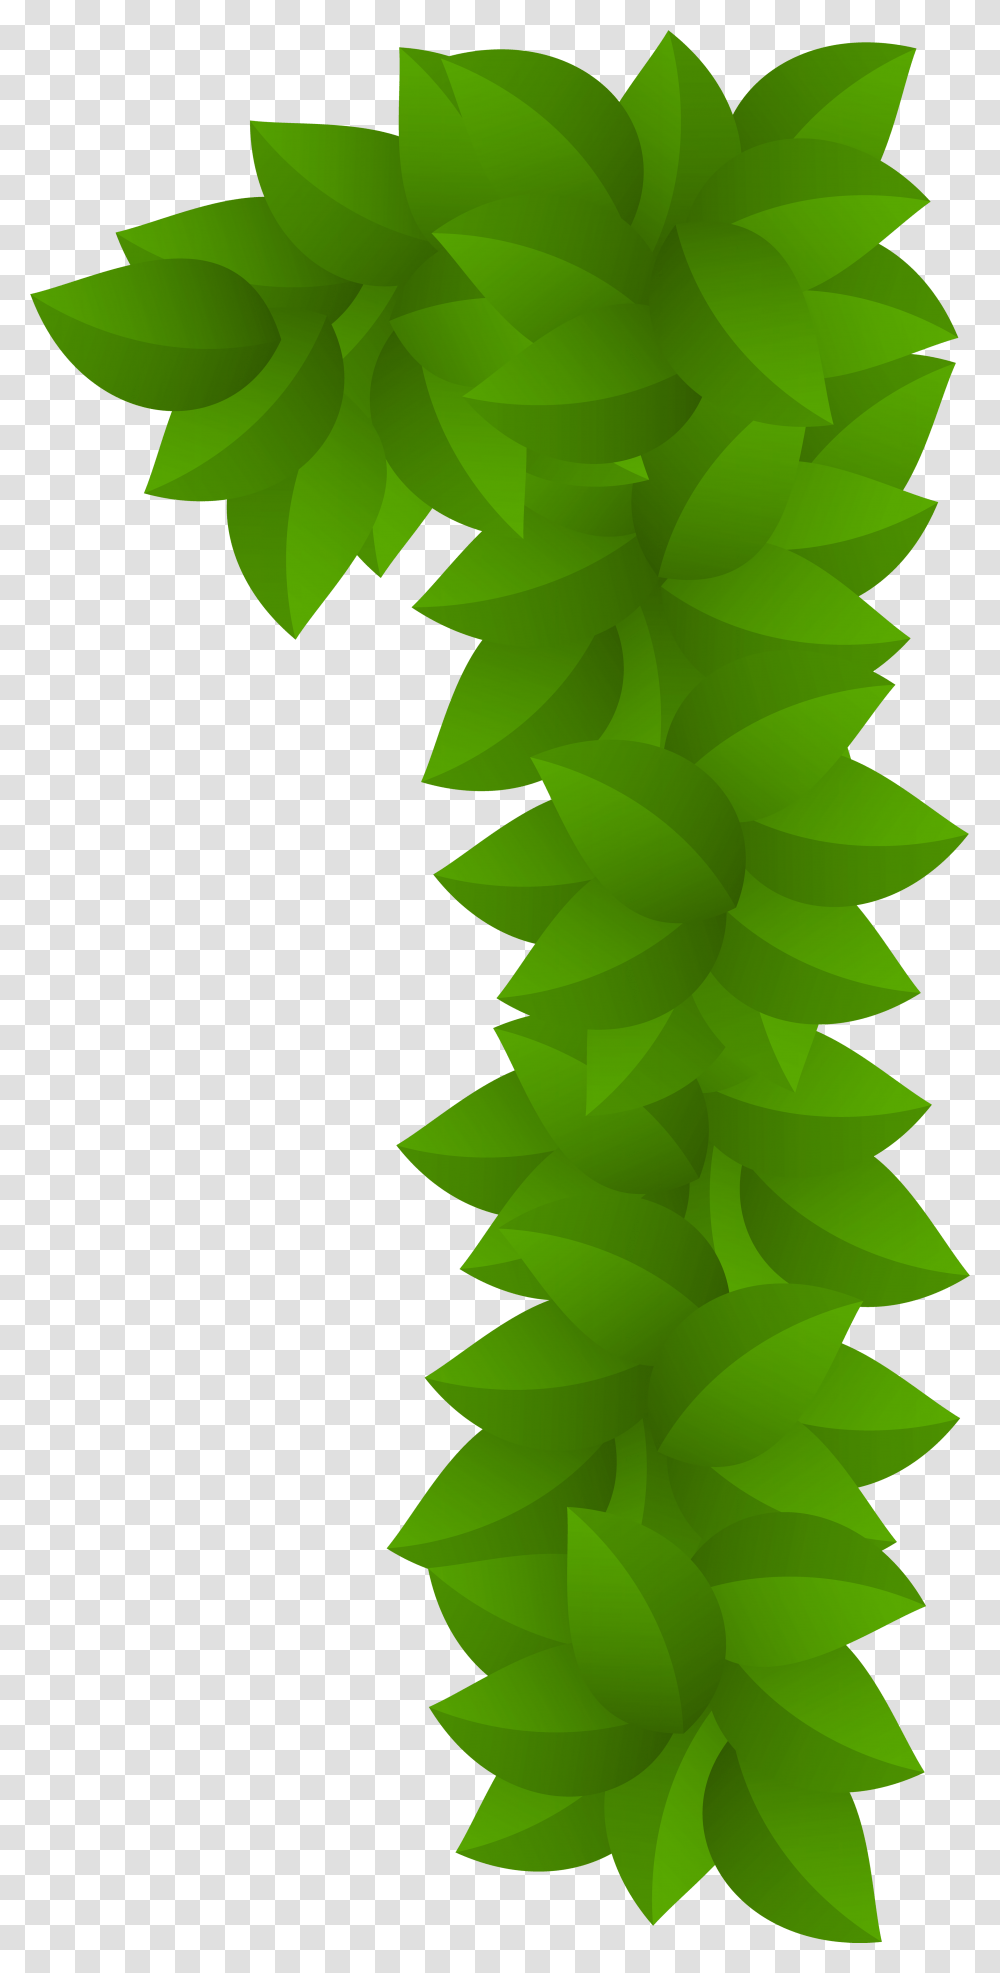 Green Leaves Clipart One Leaf Leaf Numbers Green, Plant, Tree, Pineapple Transparent Png